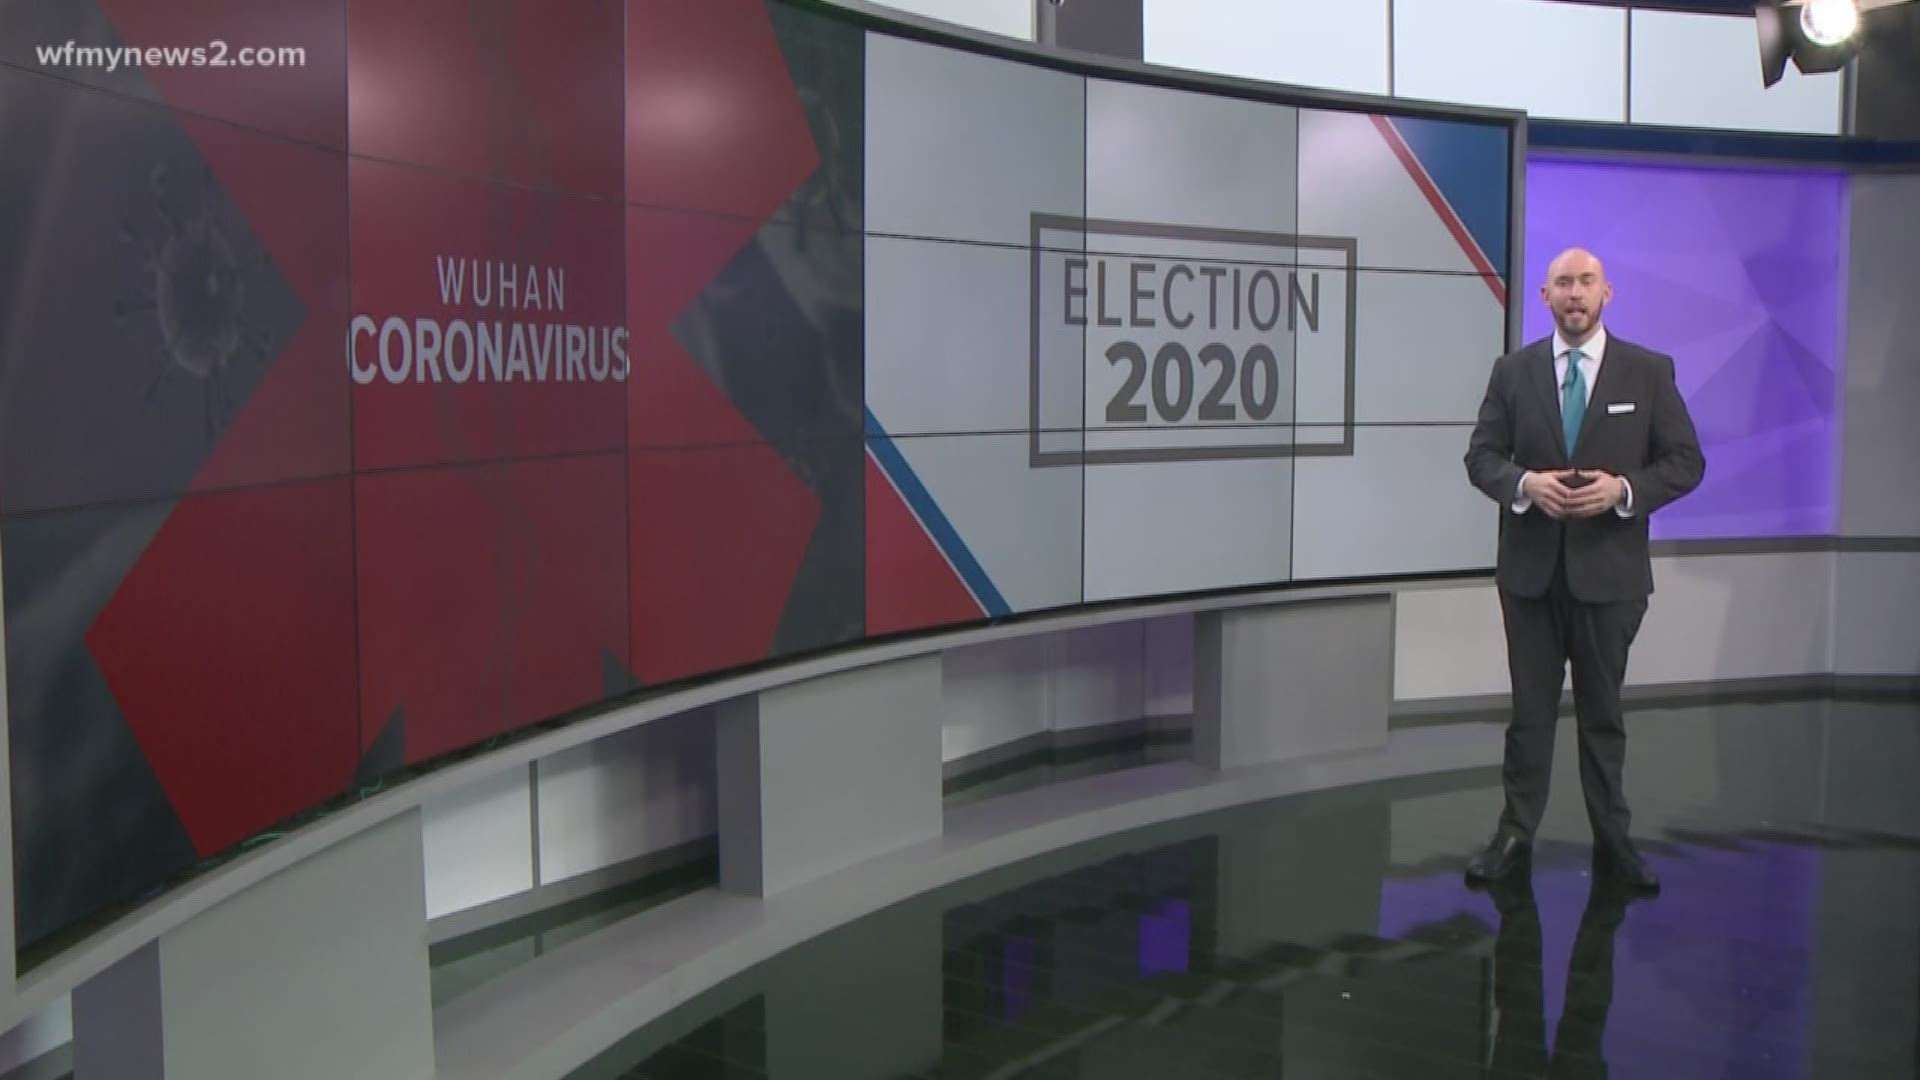 Ahead of Tuesday’s primary, plenty of you have been asking what the candidates plan to do against the coronavirus.